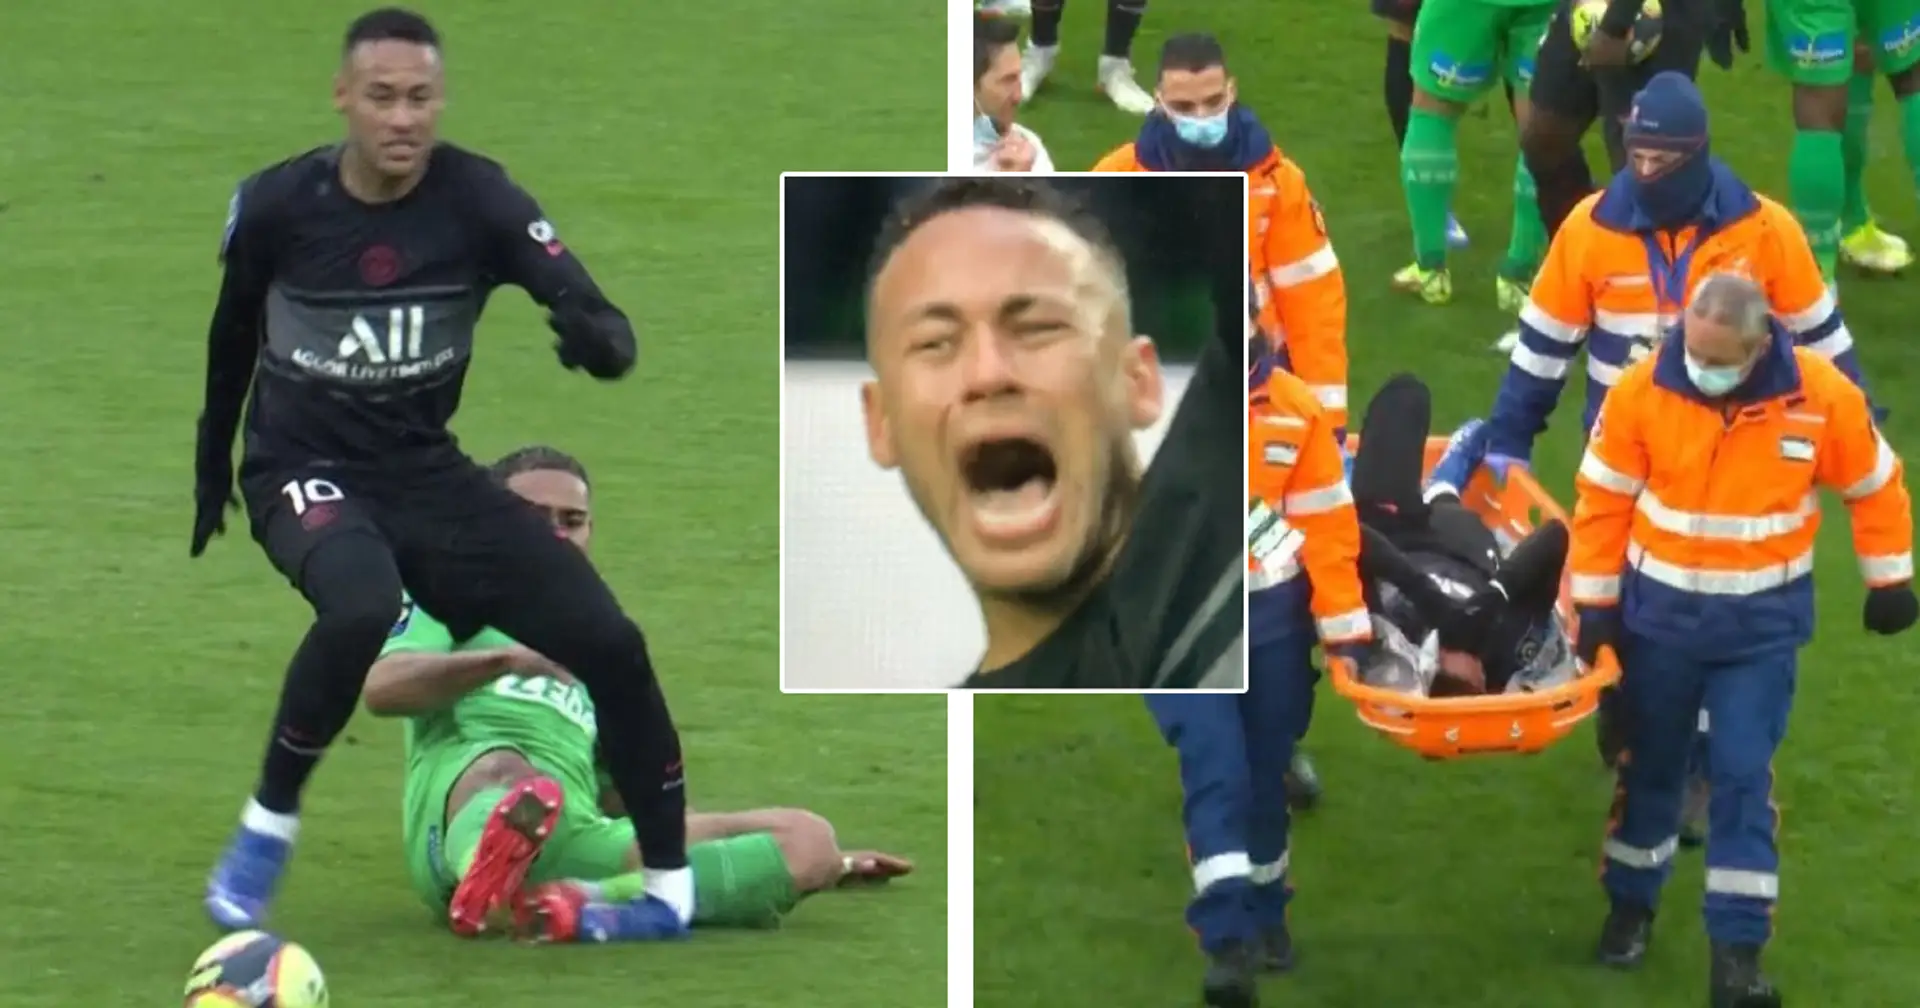 Neymar stretchered off in tears after nasty injury vs St Etienne